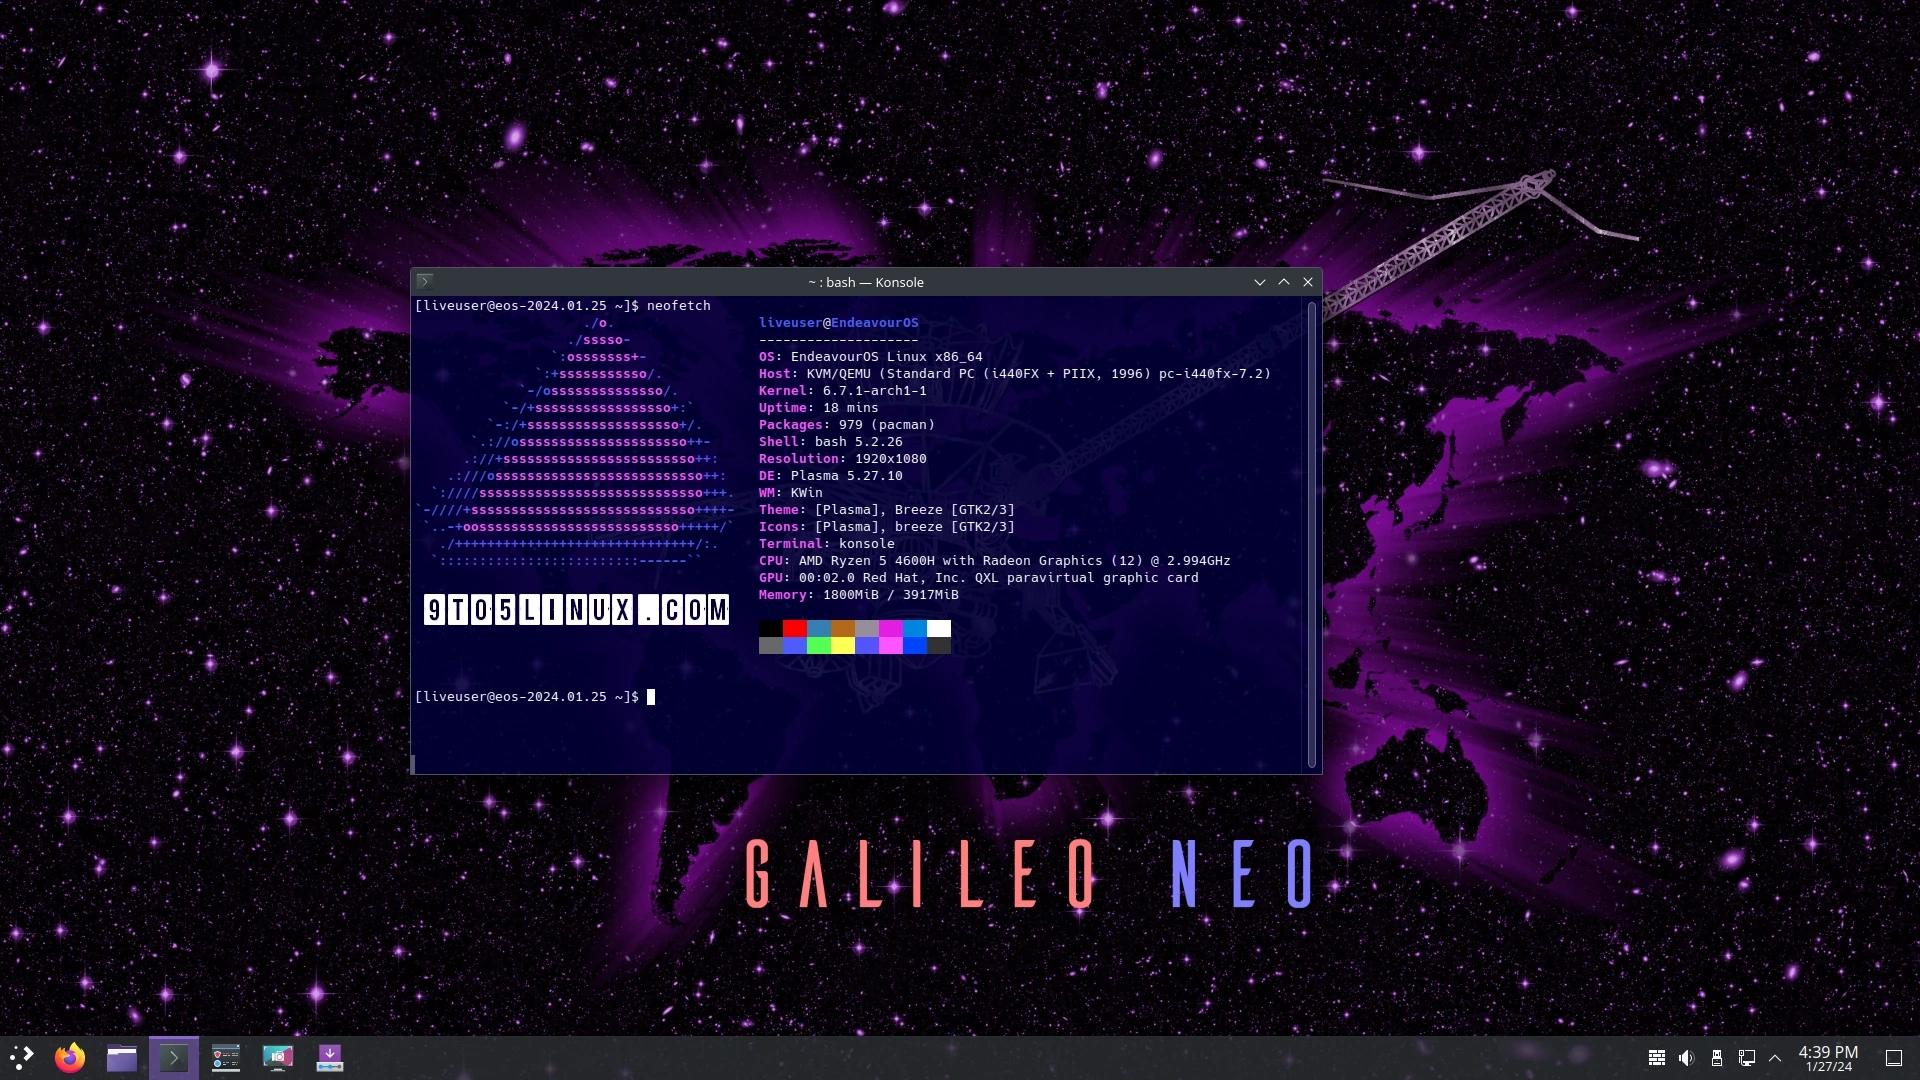 Release of EndeavourOS Galileo Neo with Linux Kernel 6.7 and Upgraded Installer